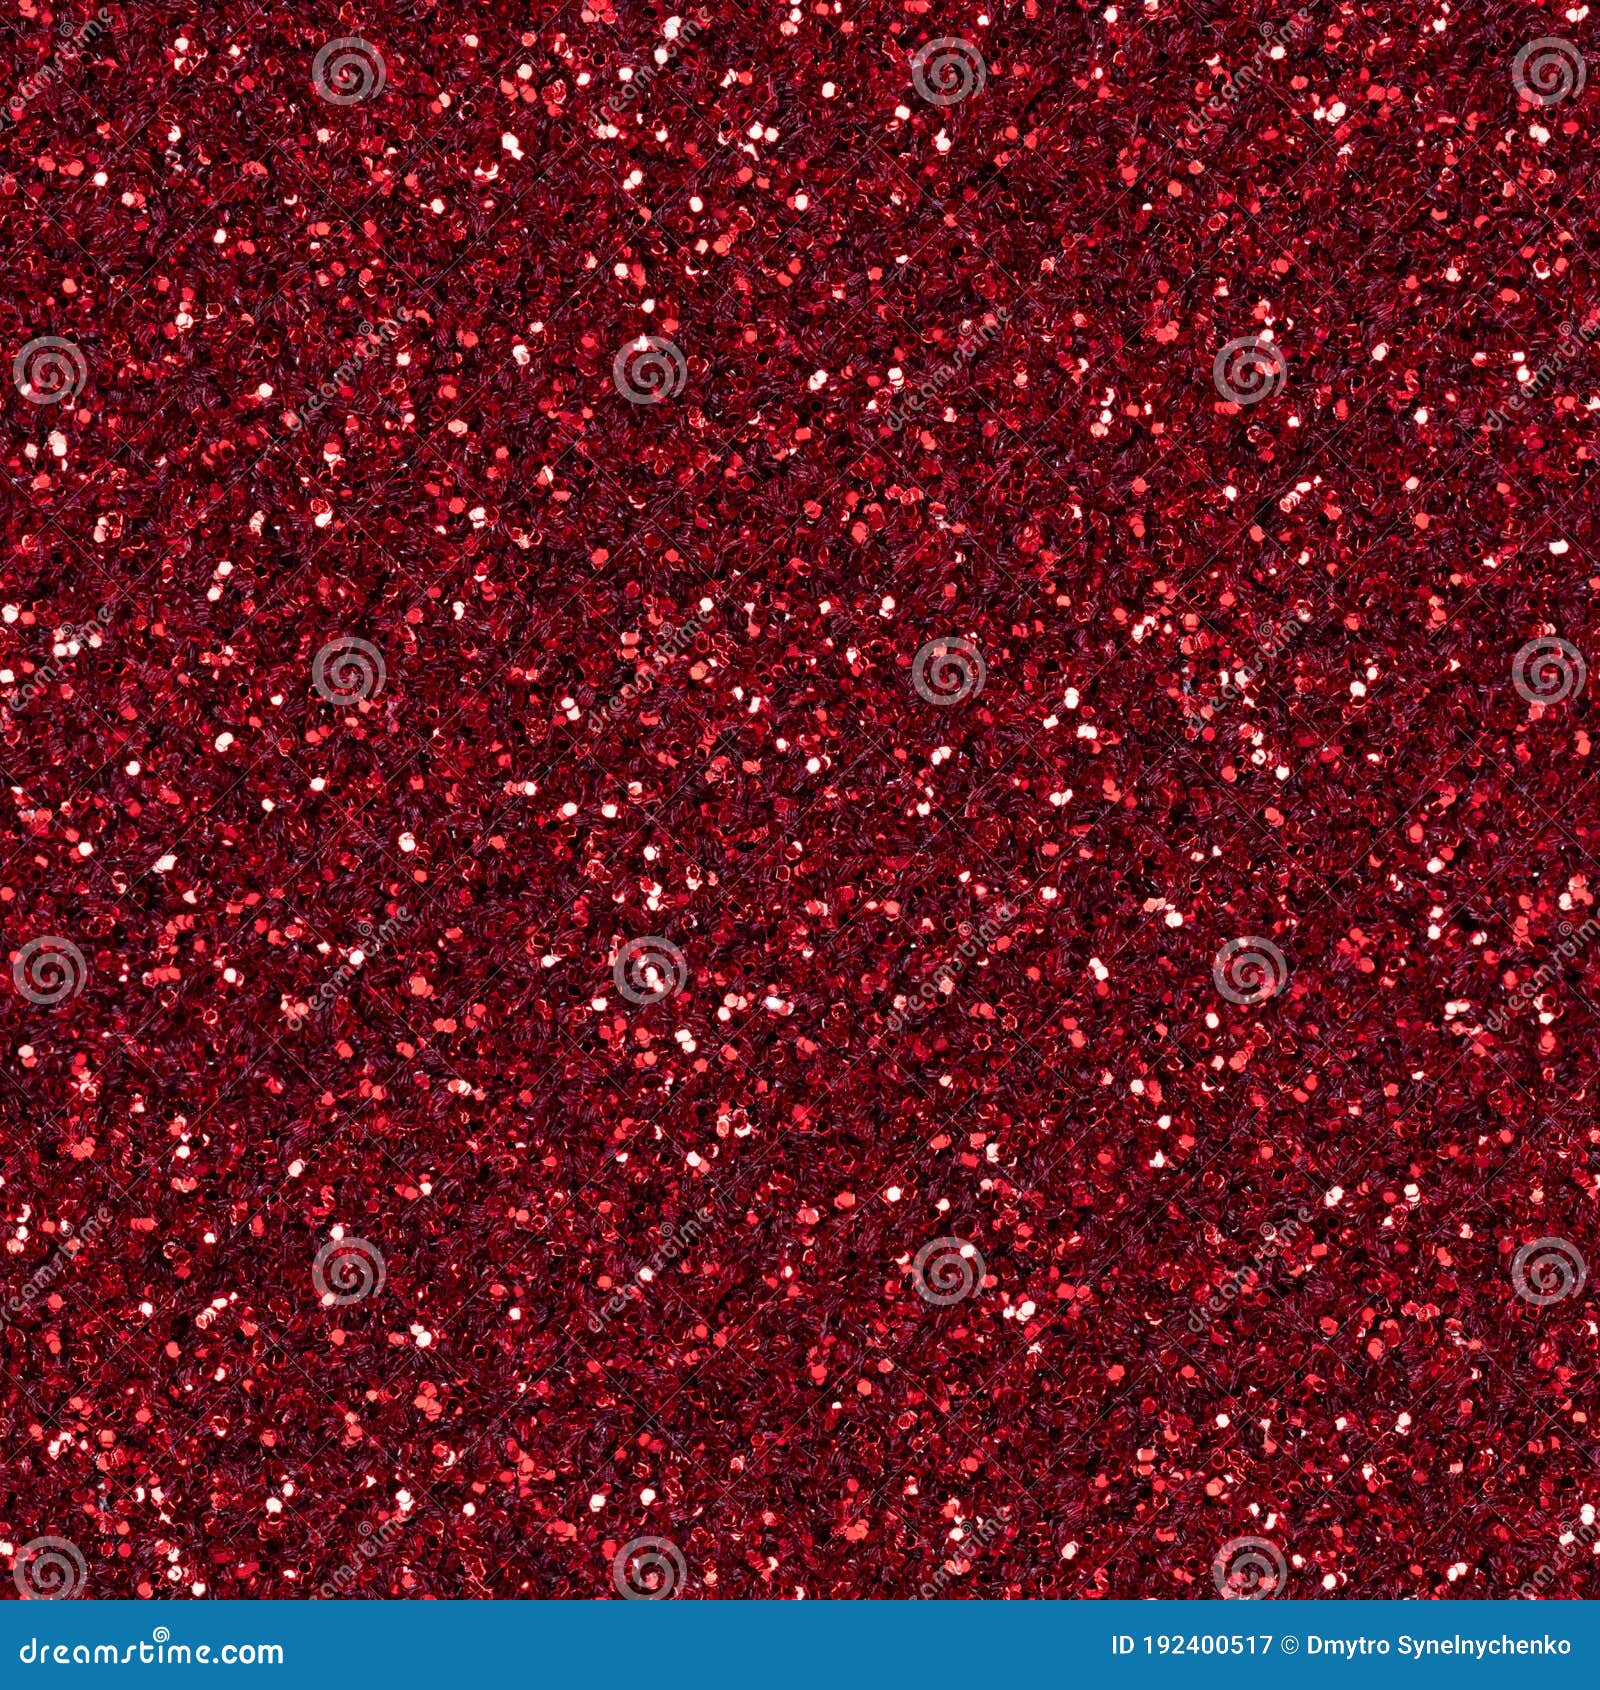 Bright crimson, red background with glitter. Can be used as